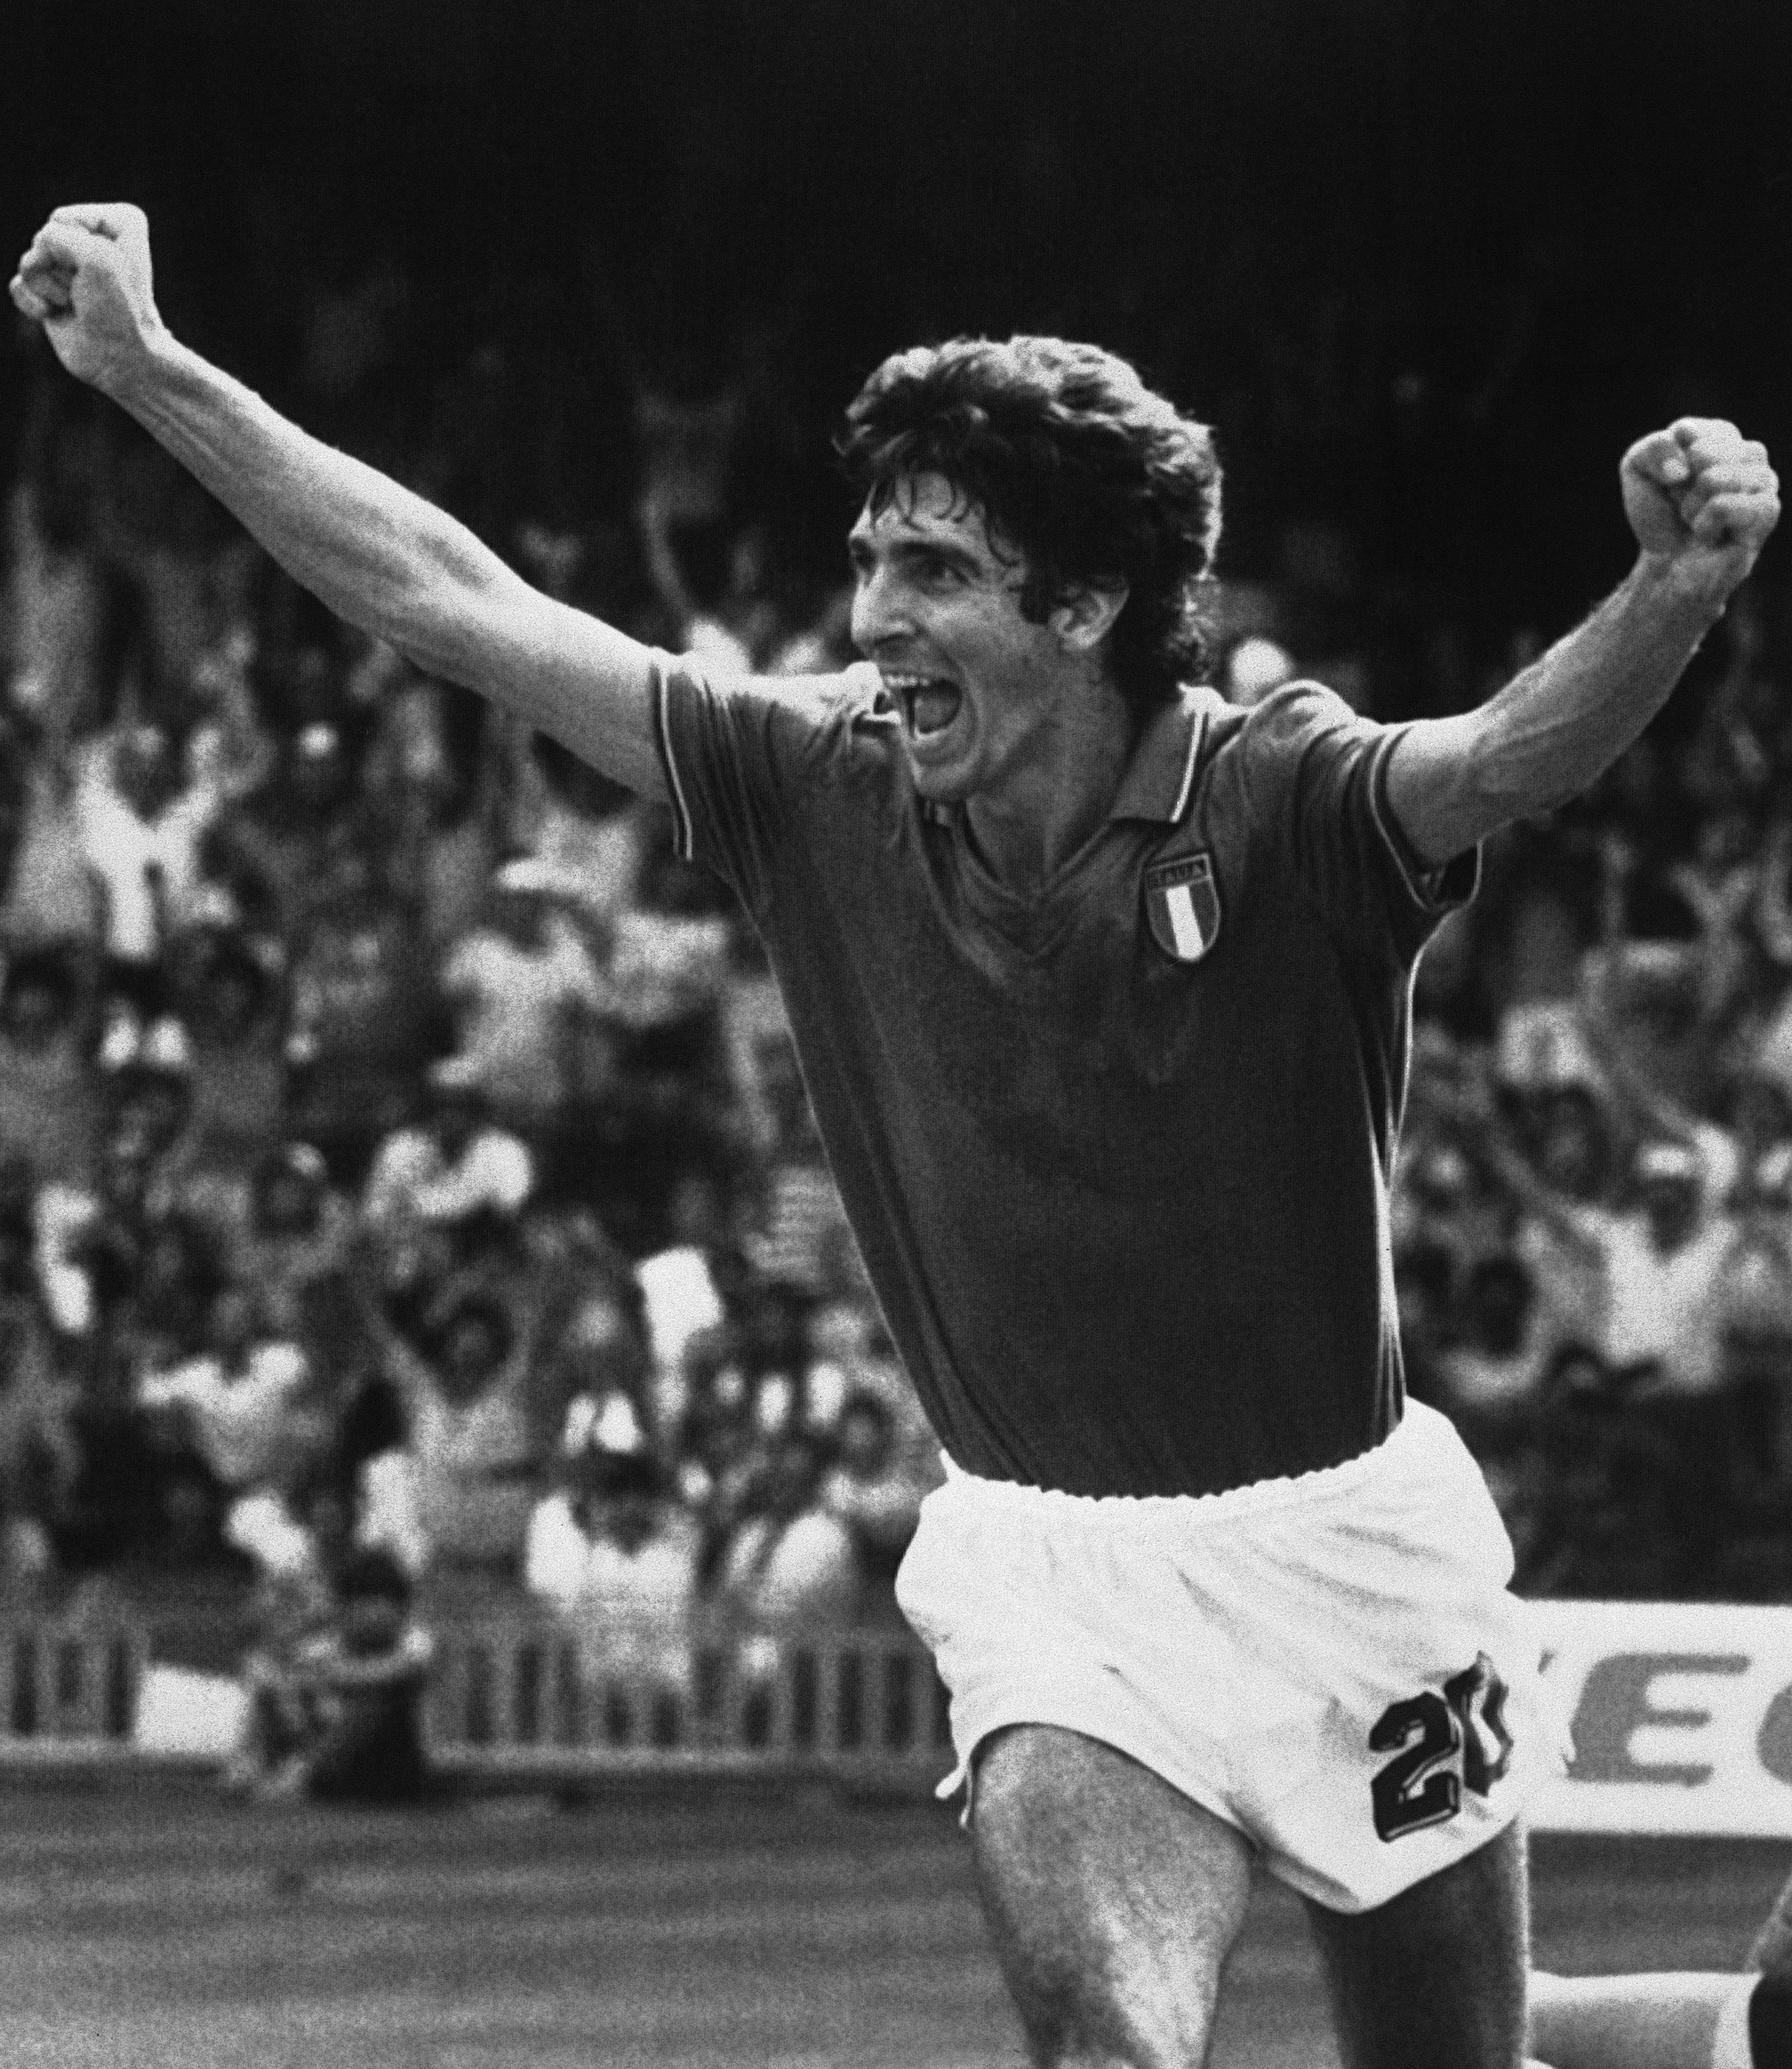 Italian football great Paolo Rossi has died, aged 64